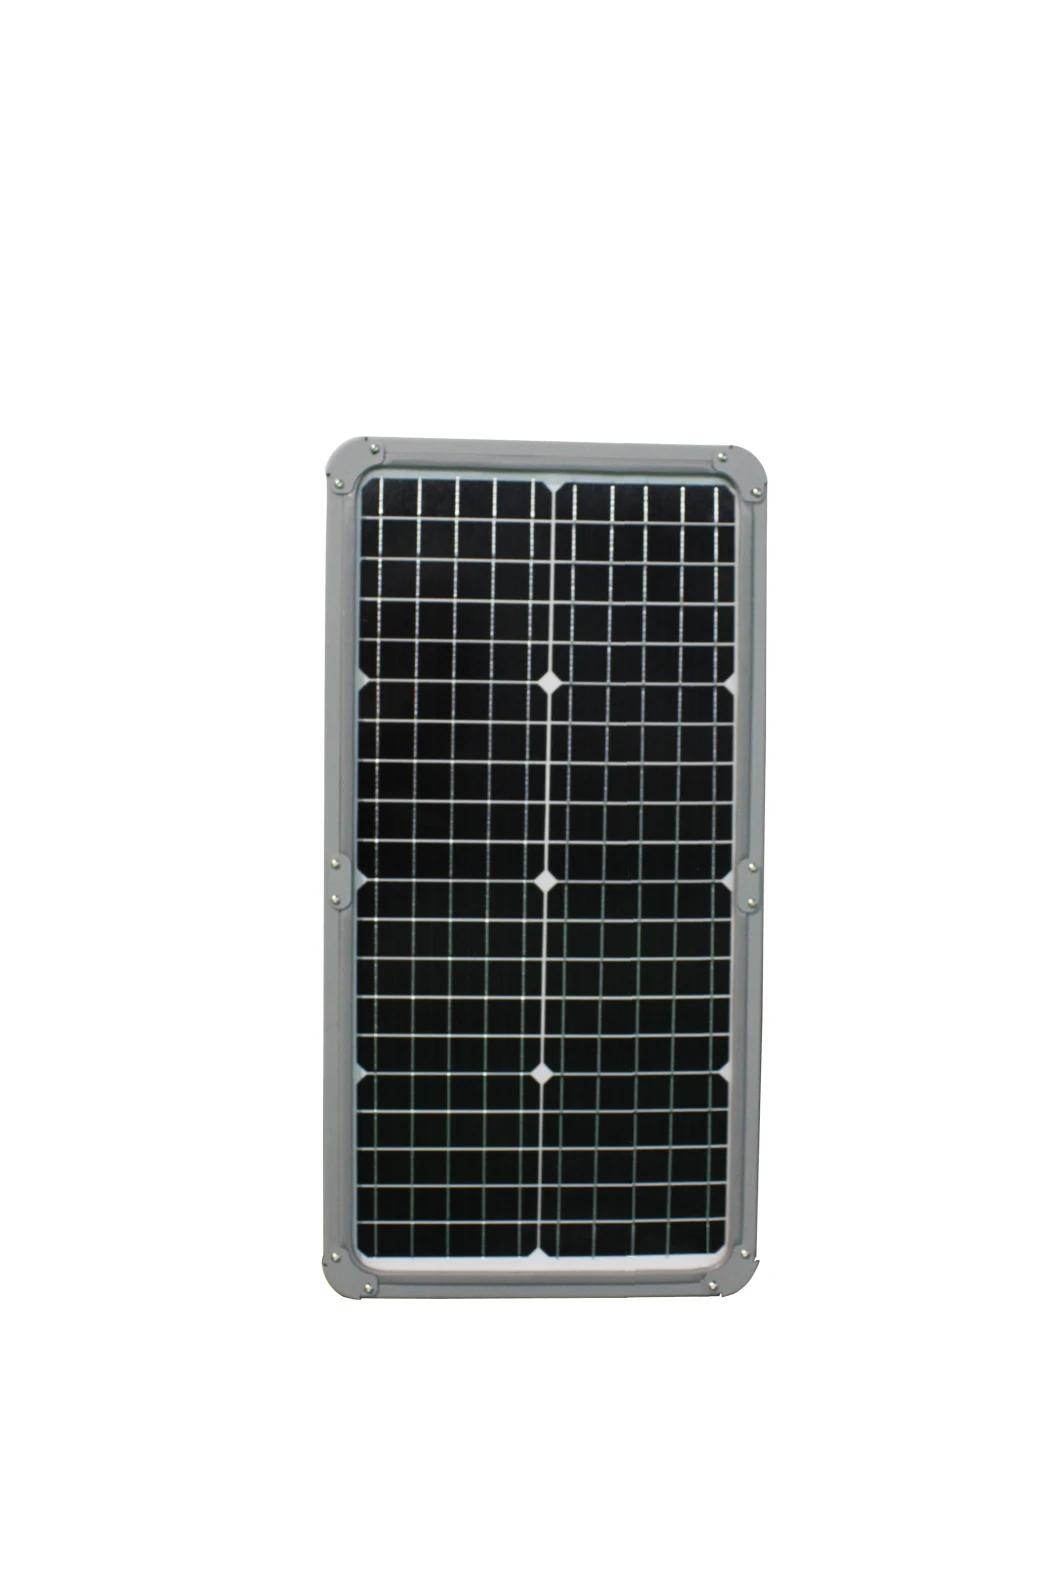 All in One LED Street Lights Solar Powered 30W-80W